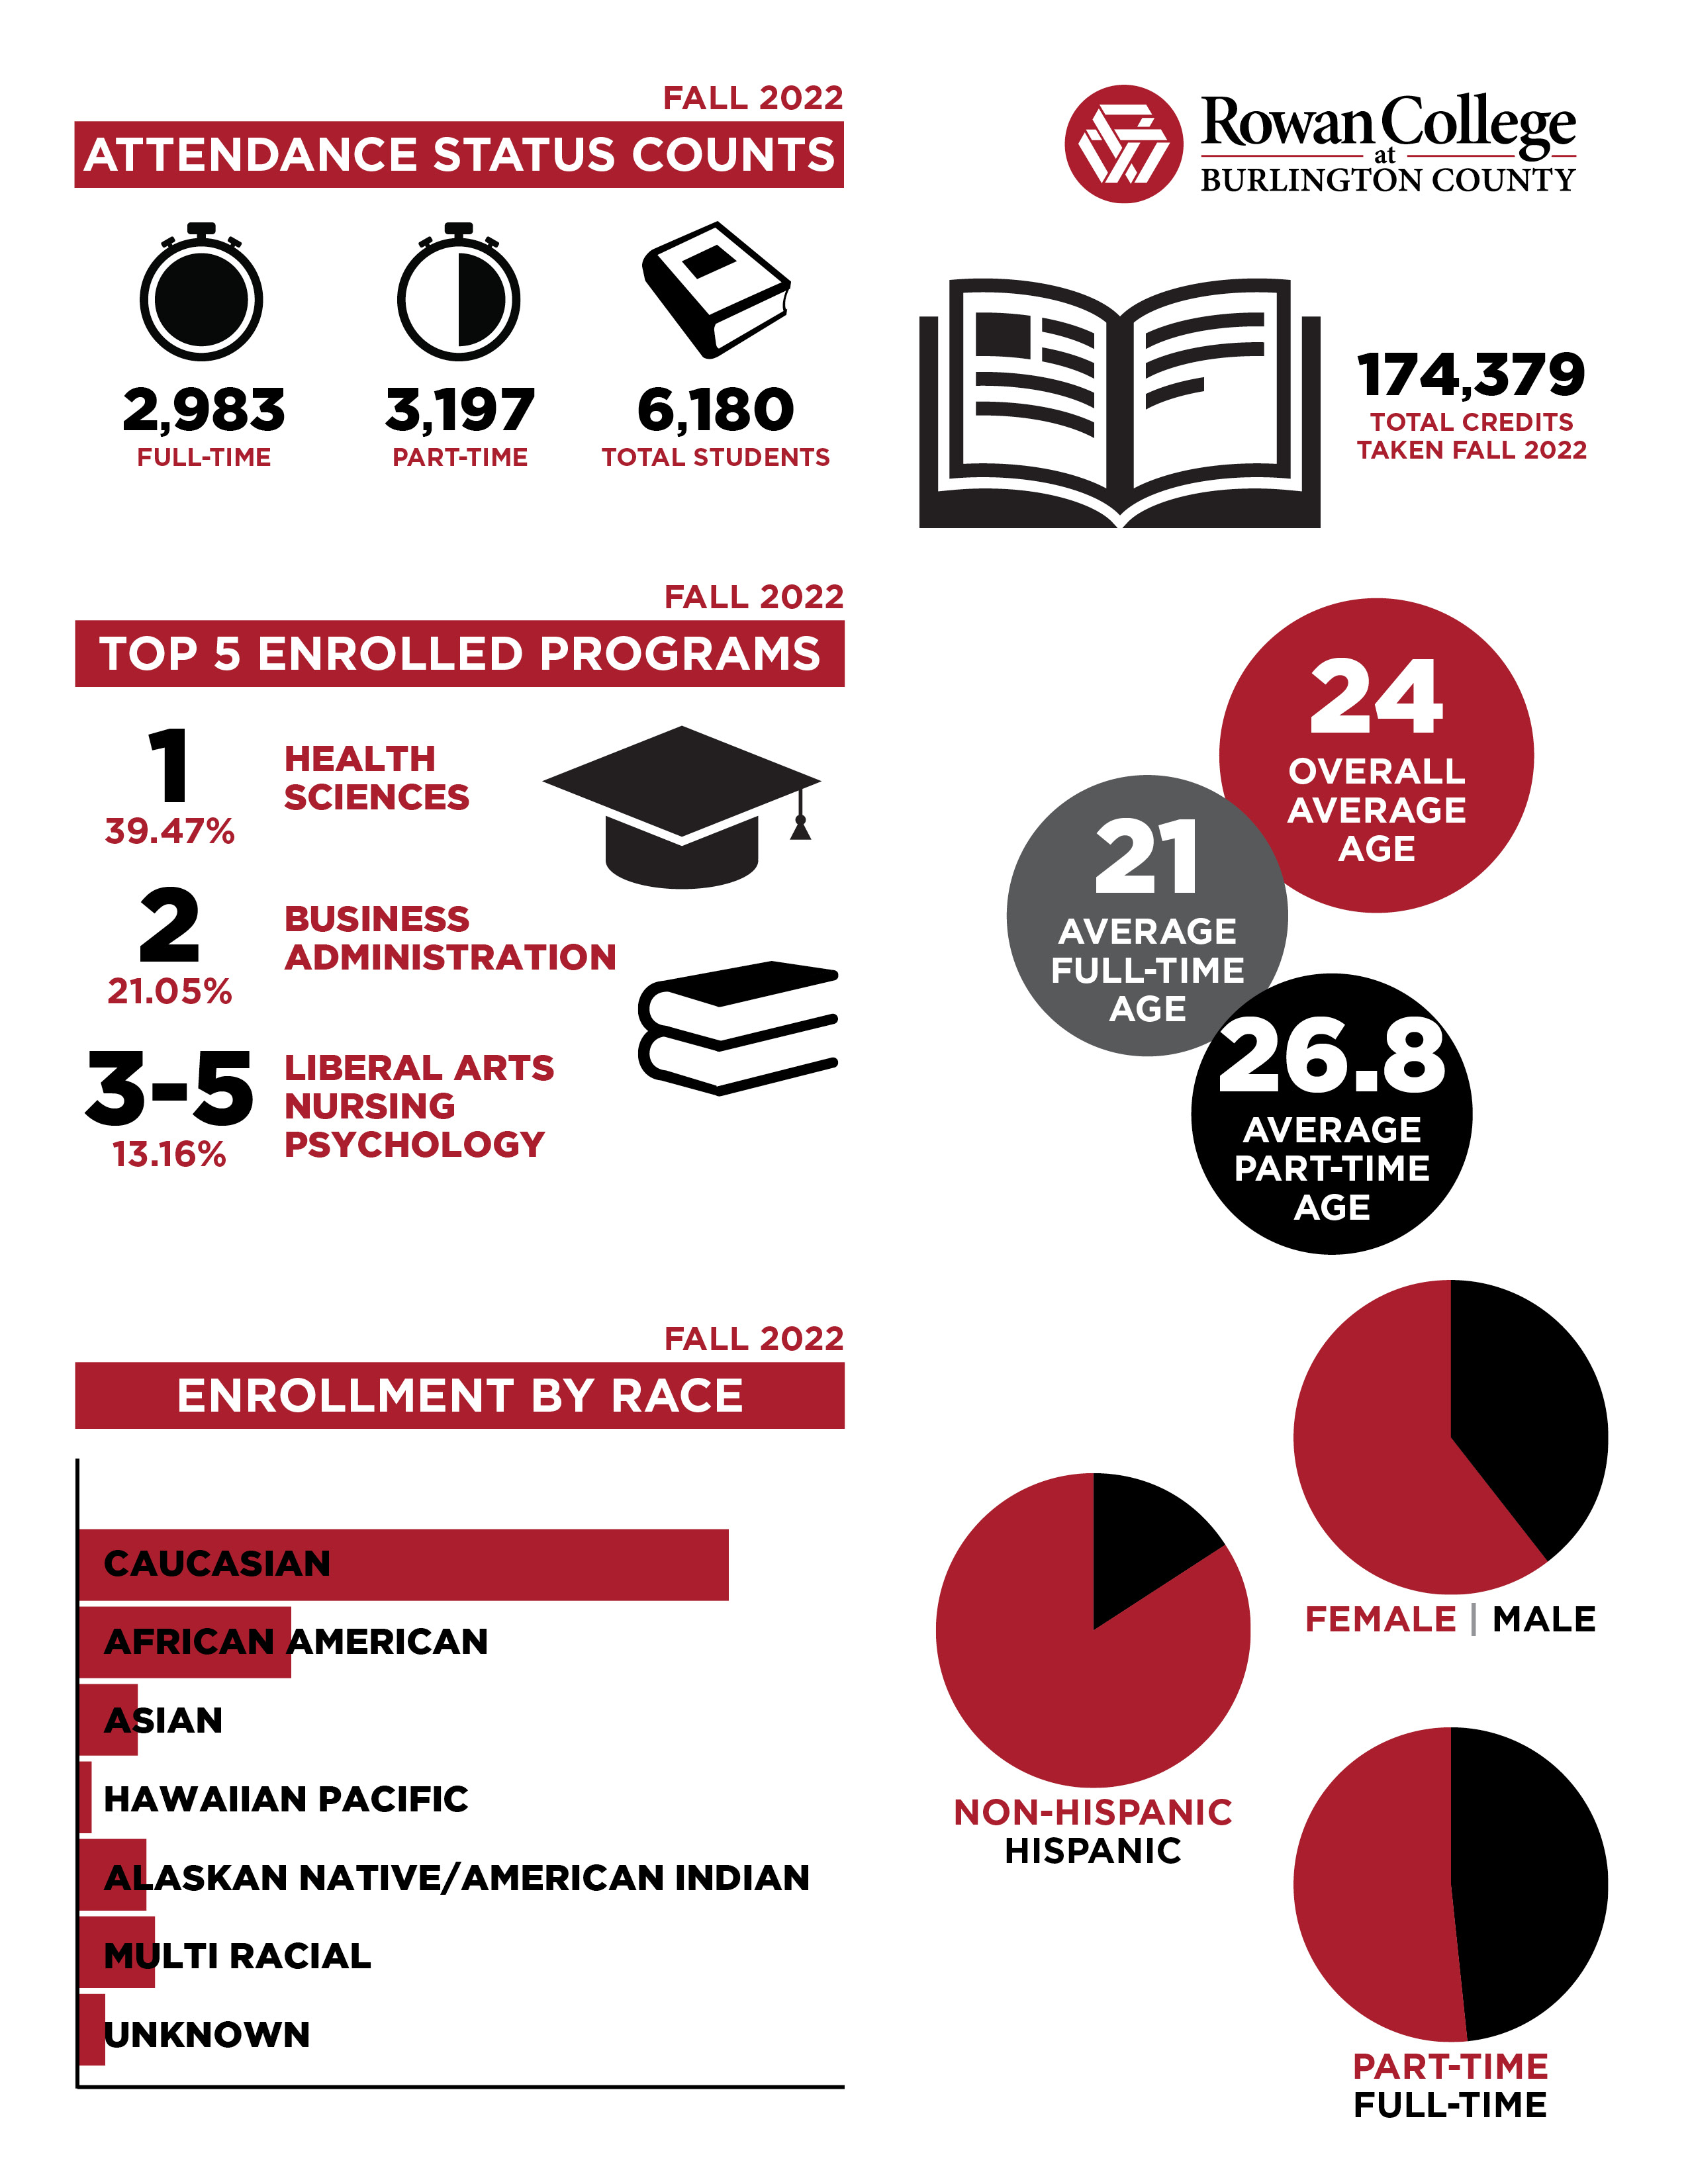 Enrollment Data Infographic - See below for accessible text data